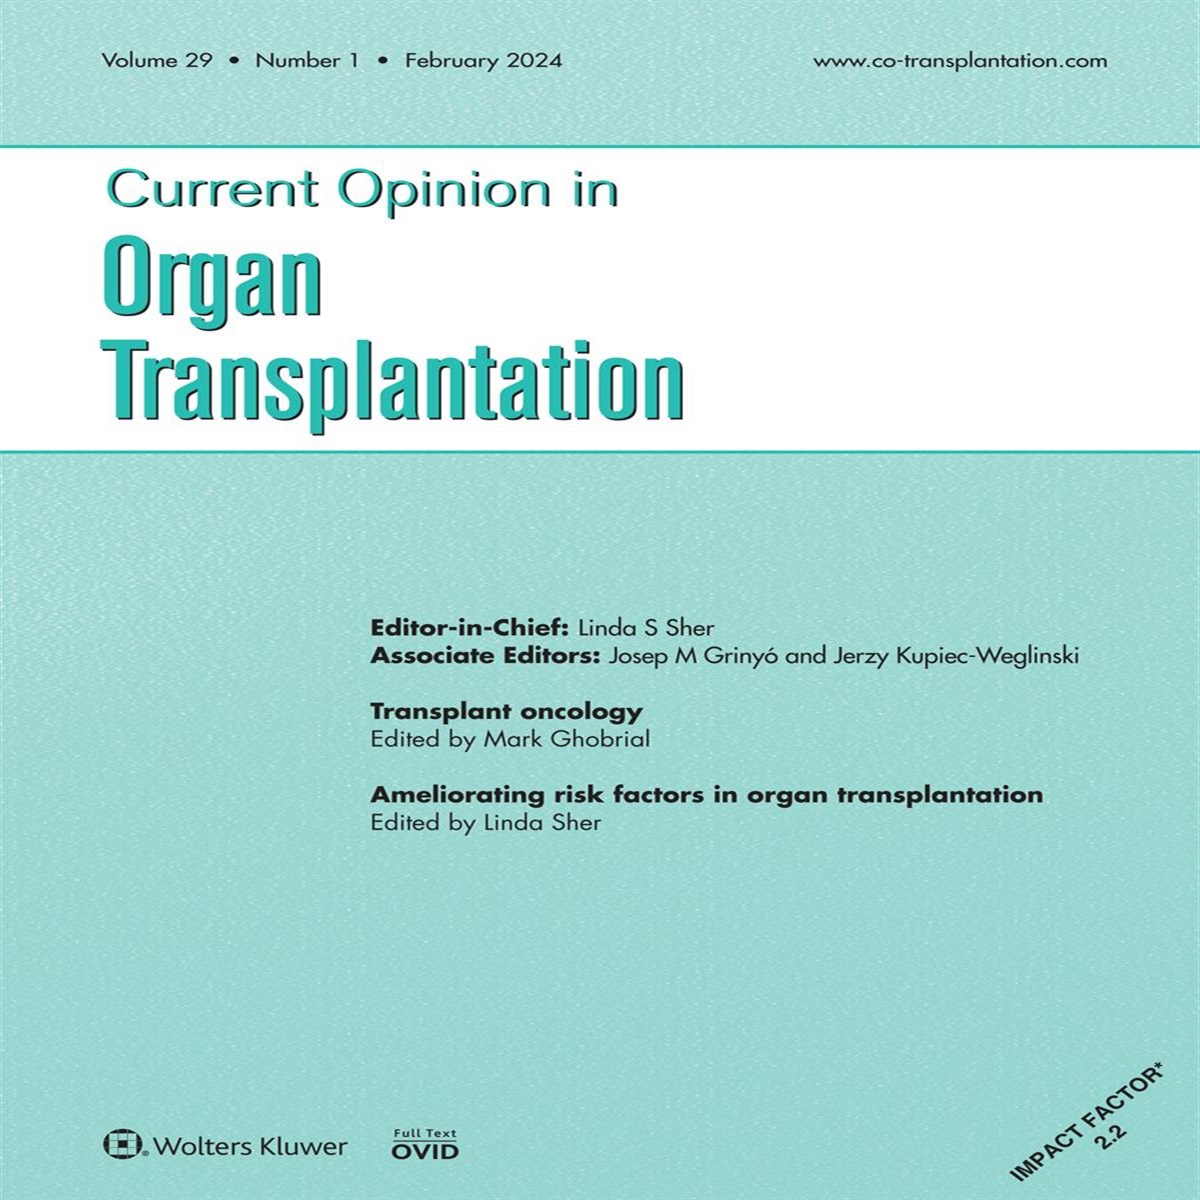 Current Opinion in Organ Transplantation welcomes a new Editor-in-Chief